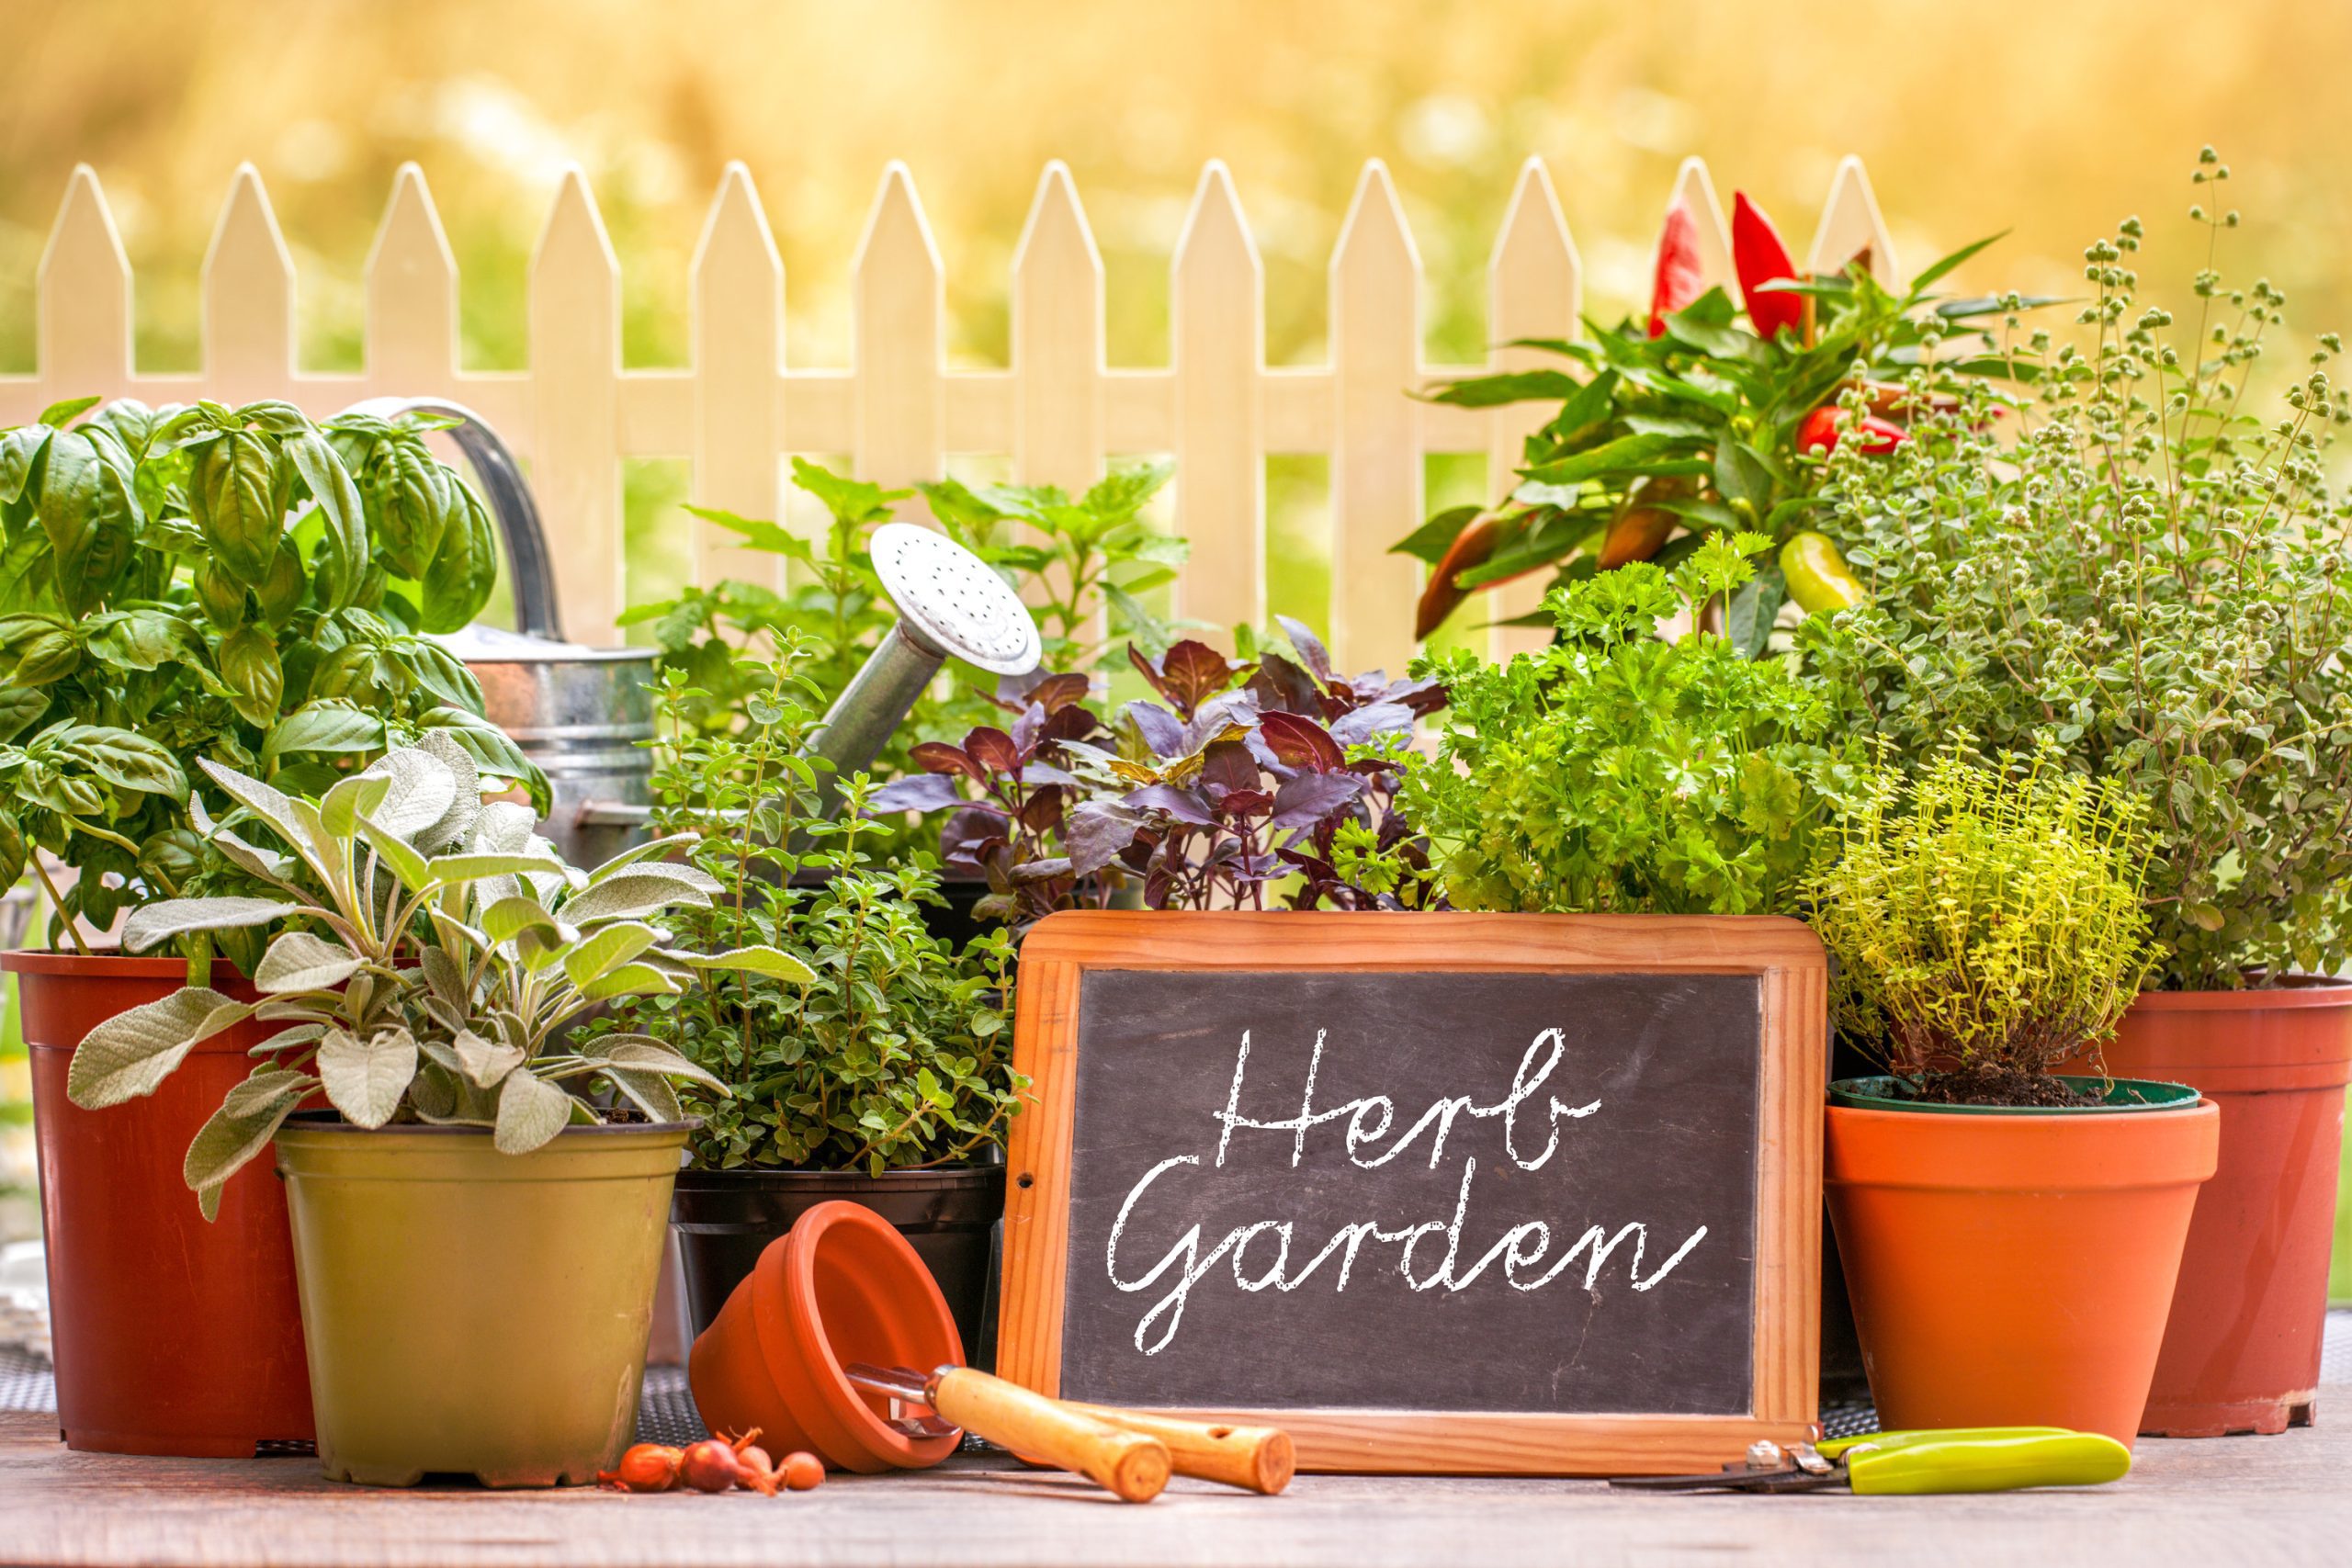 Discover Herb Gardening – Get The Natural Truths!